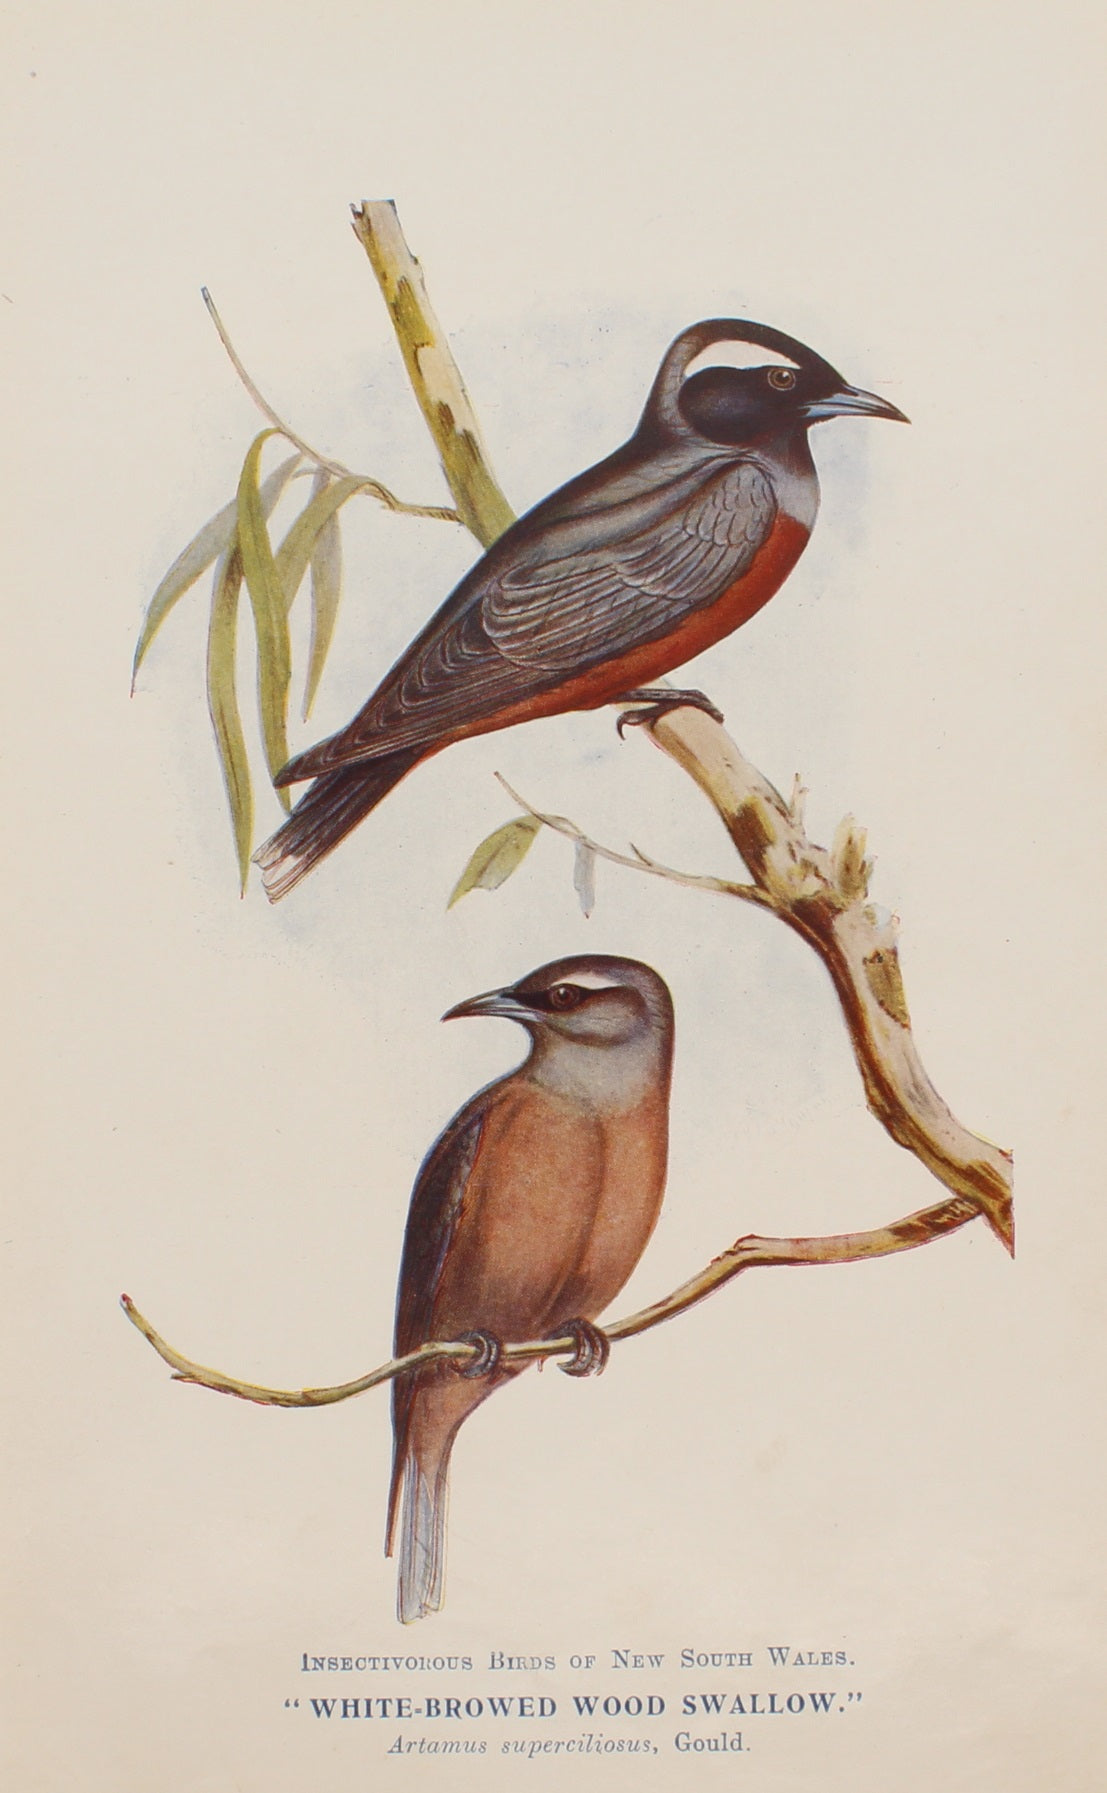 Bird, North Alfred John, White Browed Wood Swallow,  Insectivorous Birds of NSW, 1896